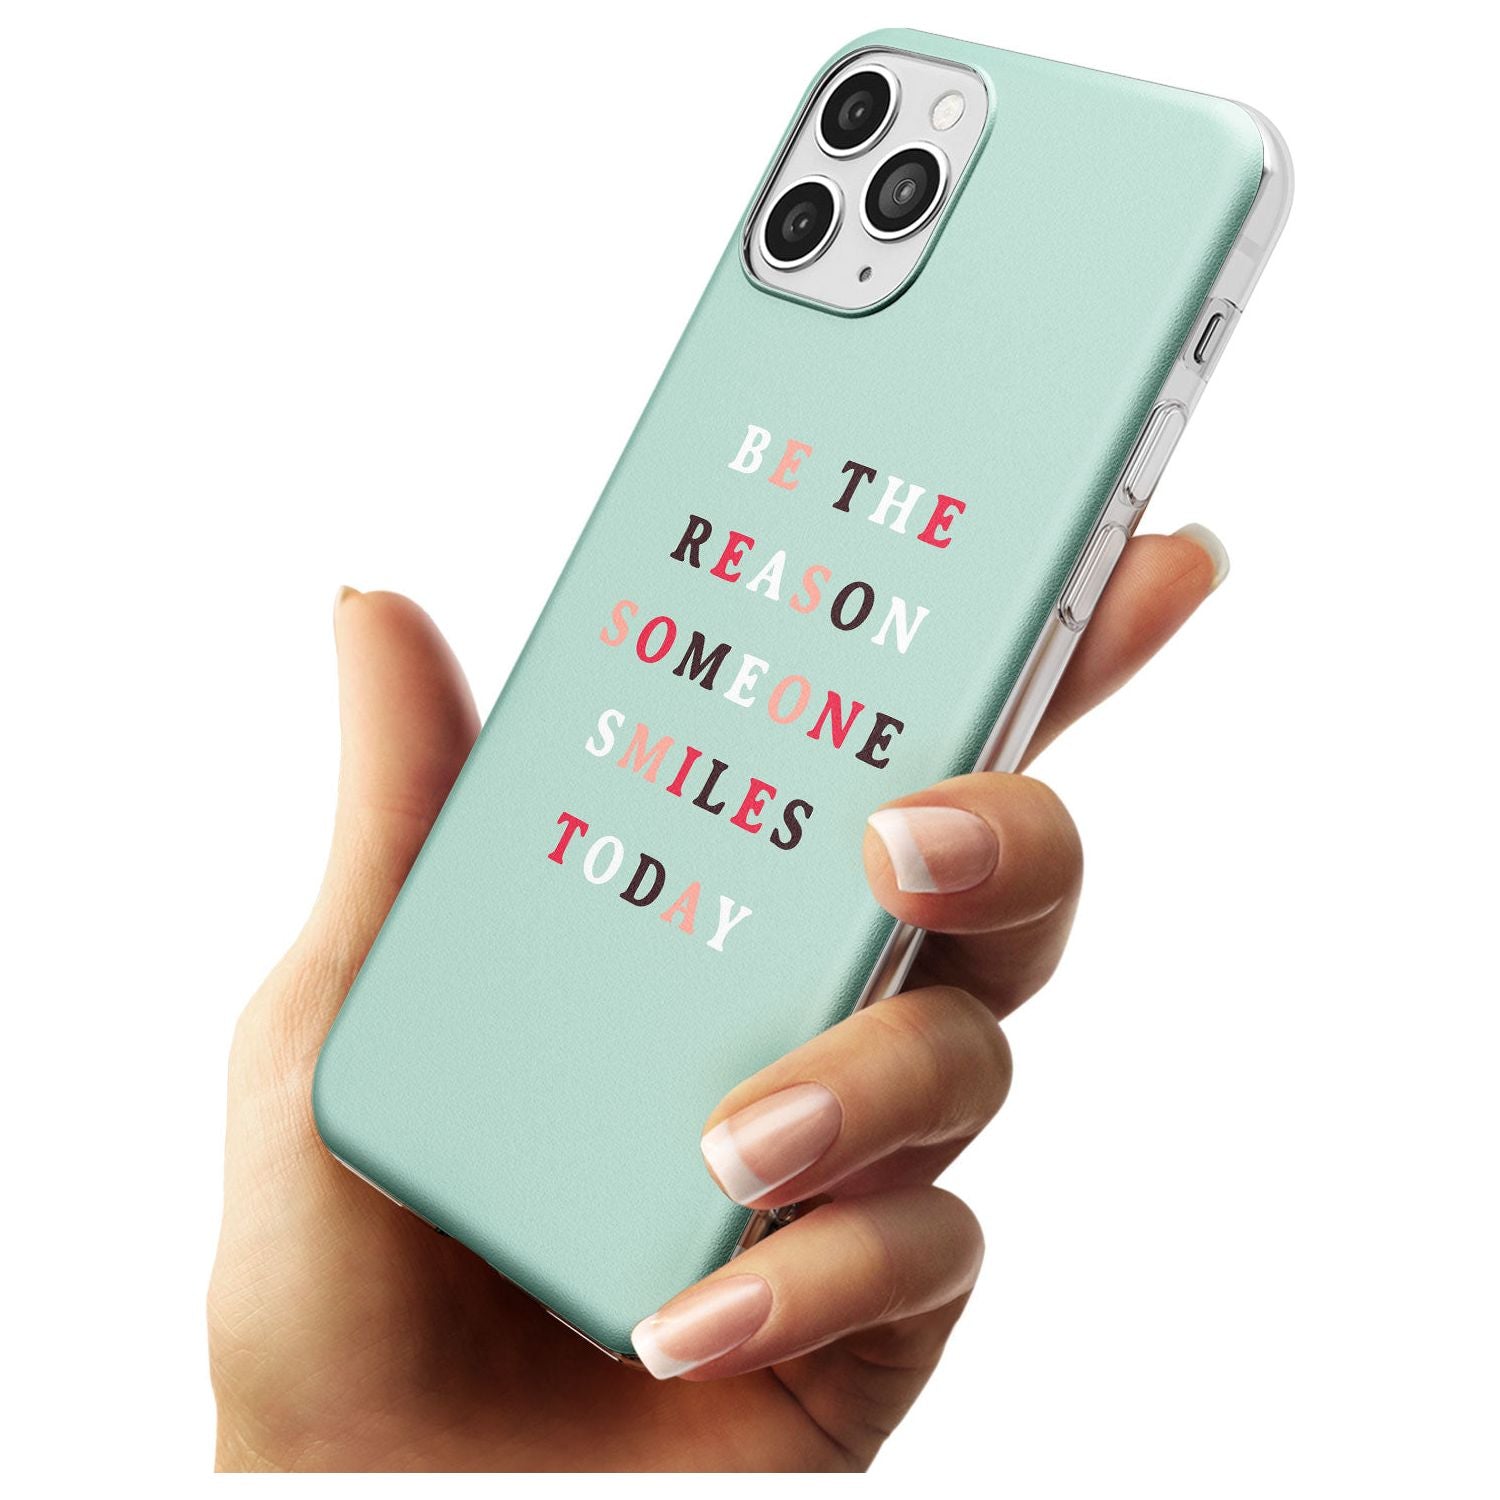 Be the reason someone smiles Slim TPU Phone Case for iPhone 11 Pro Max